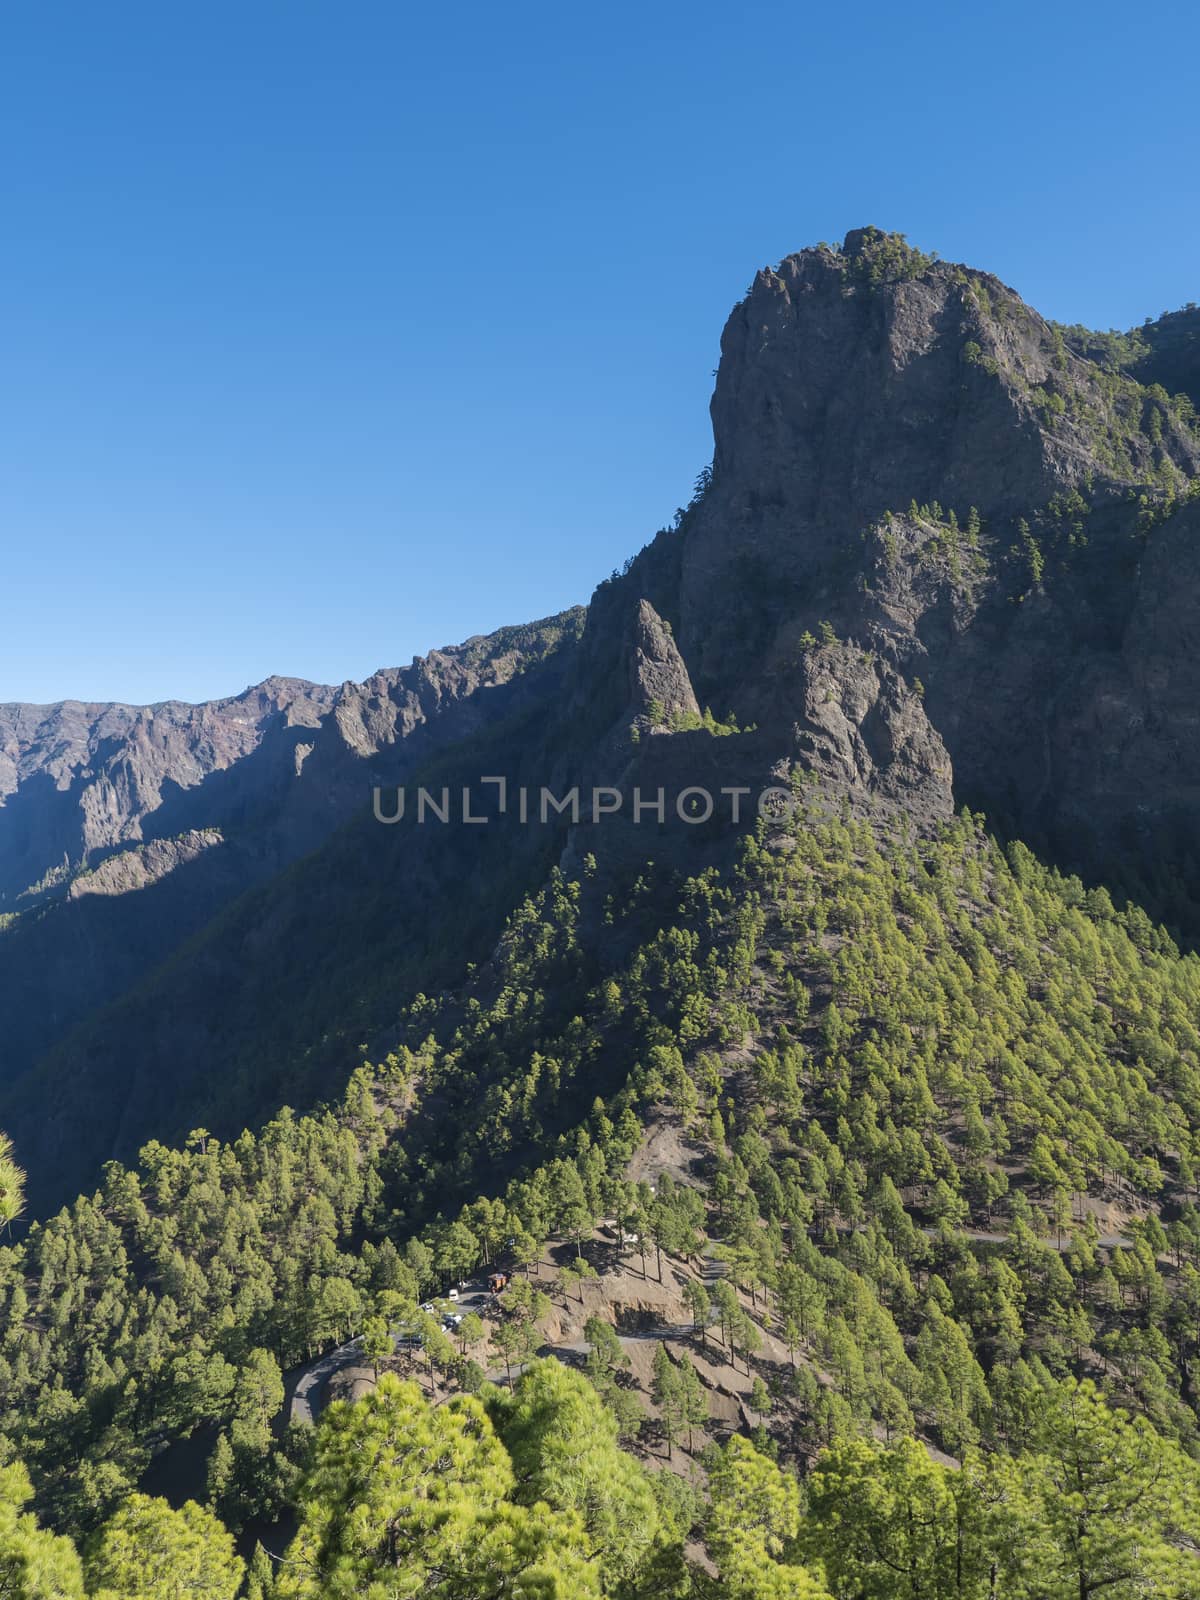 Volcanic landscape and lush pine tree forest, pinus canariensis view from Mirador de la Cumbrecita viewpoint at national park Caldera de Taburiente, volcanic crater in La Palma, Canary Islands, Spain by Henkeova